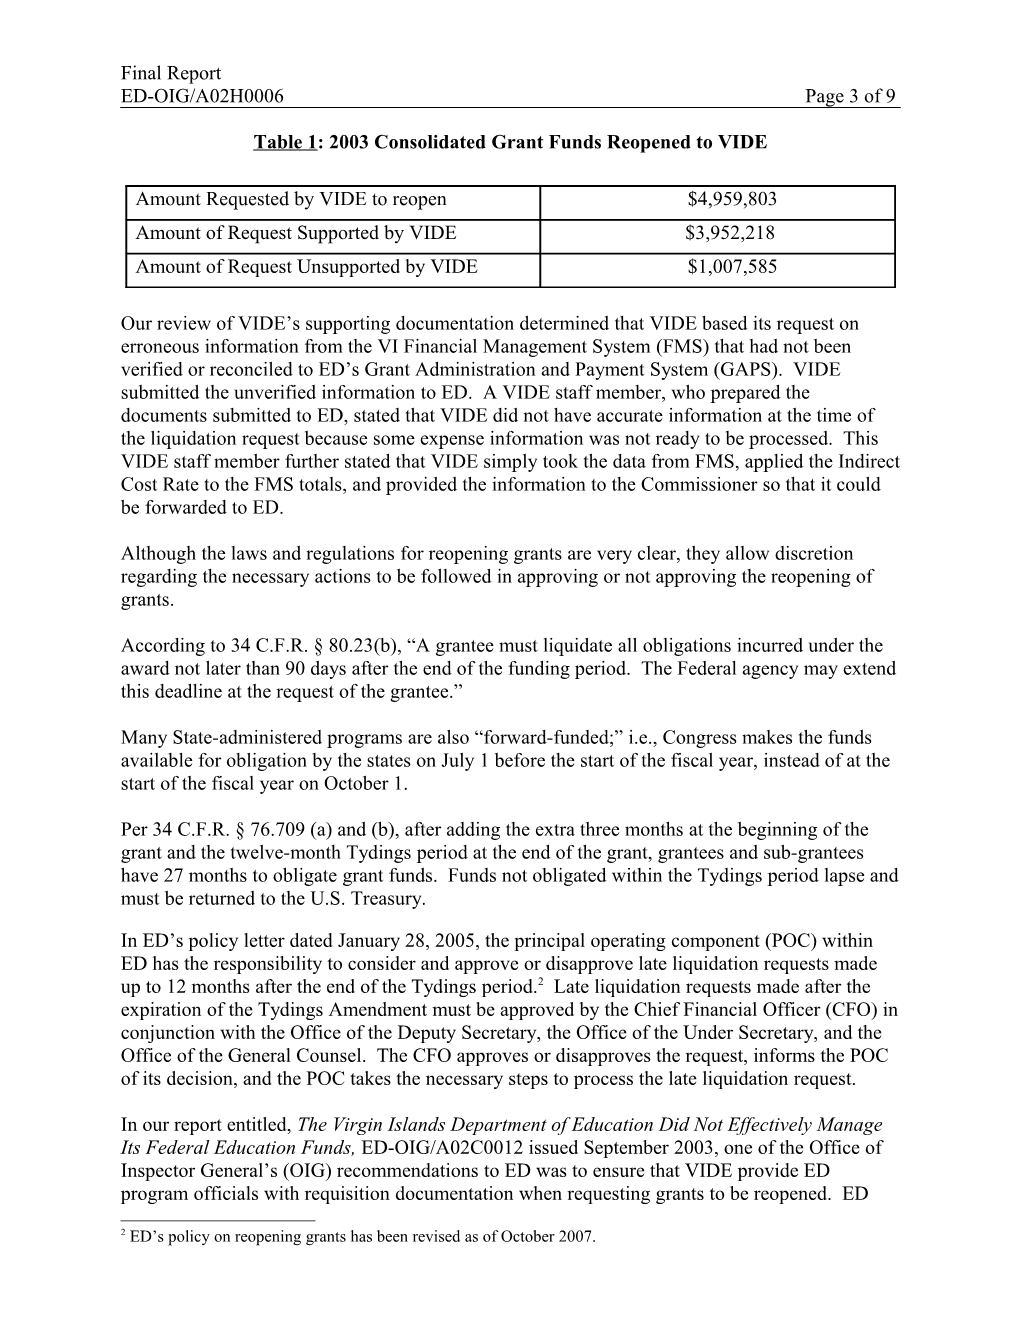 Audit A02H0006 - Audit of the Virgin Islands Department of Education's 2003 Reopened